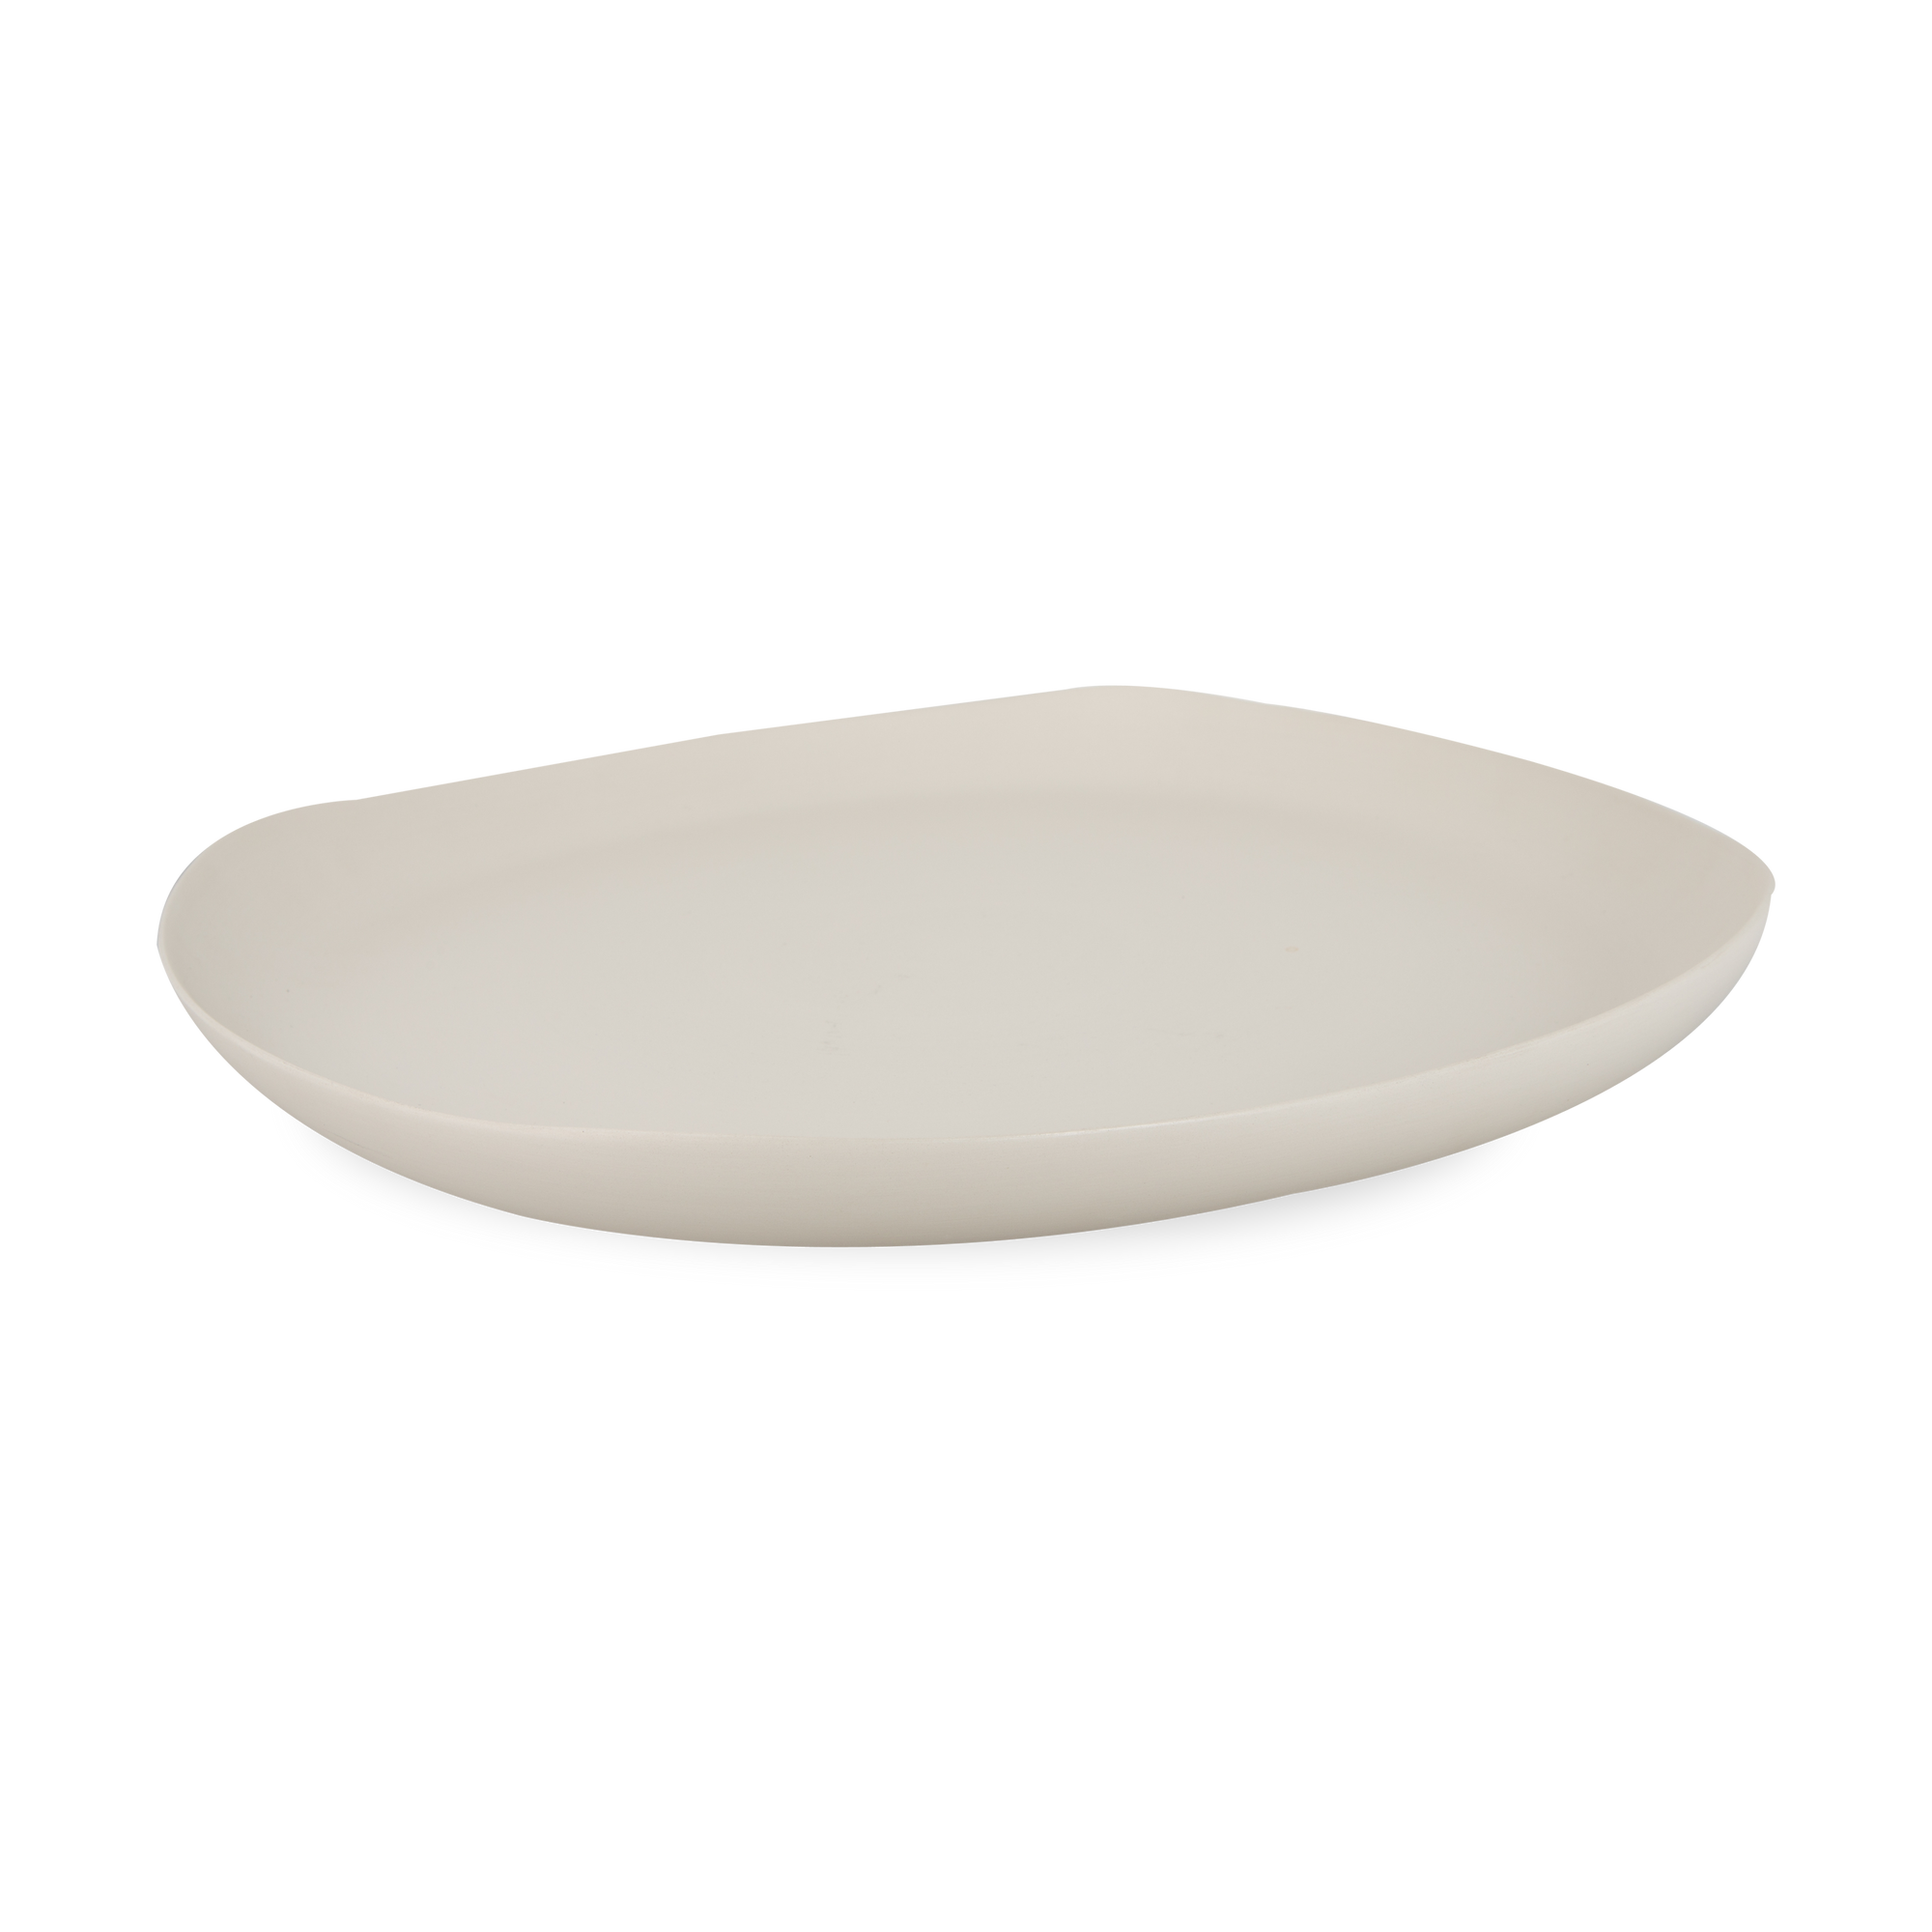 The Quad Linen Platter has been completely handmade and is characterized by simple lines, organic colour and circular shape that is inspired by nature.